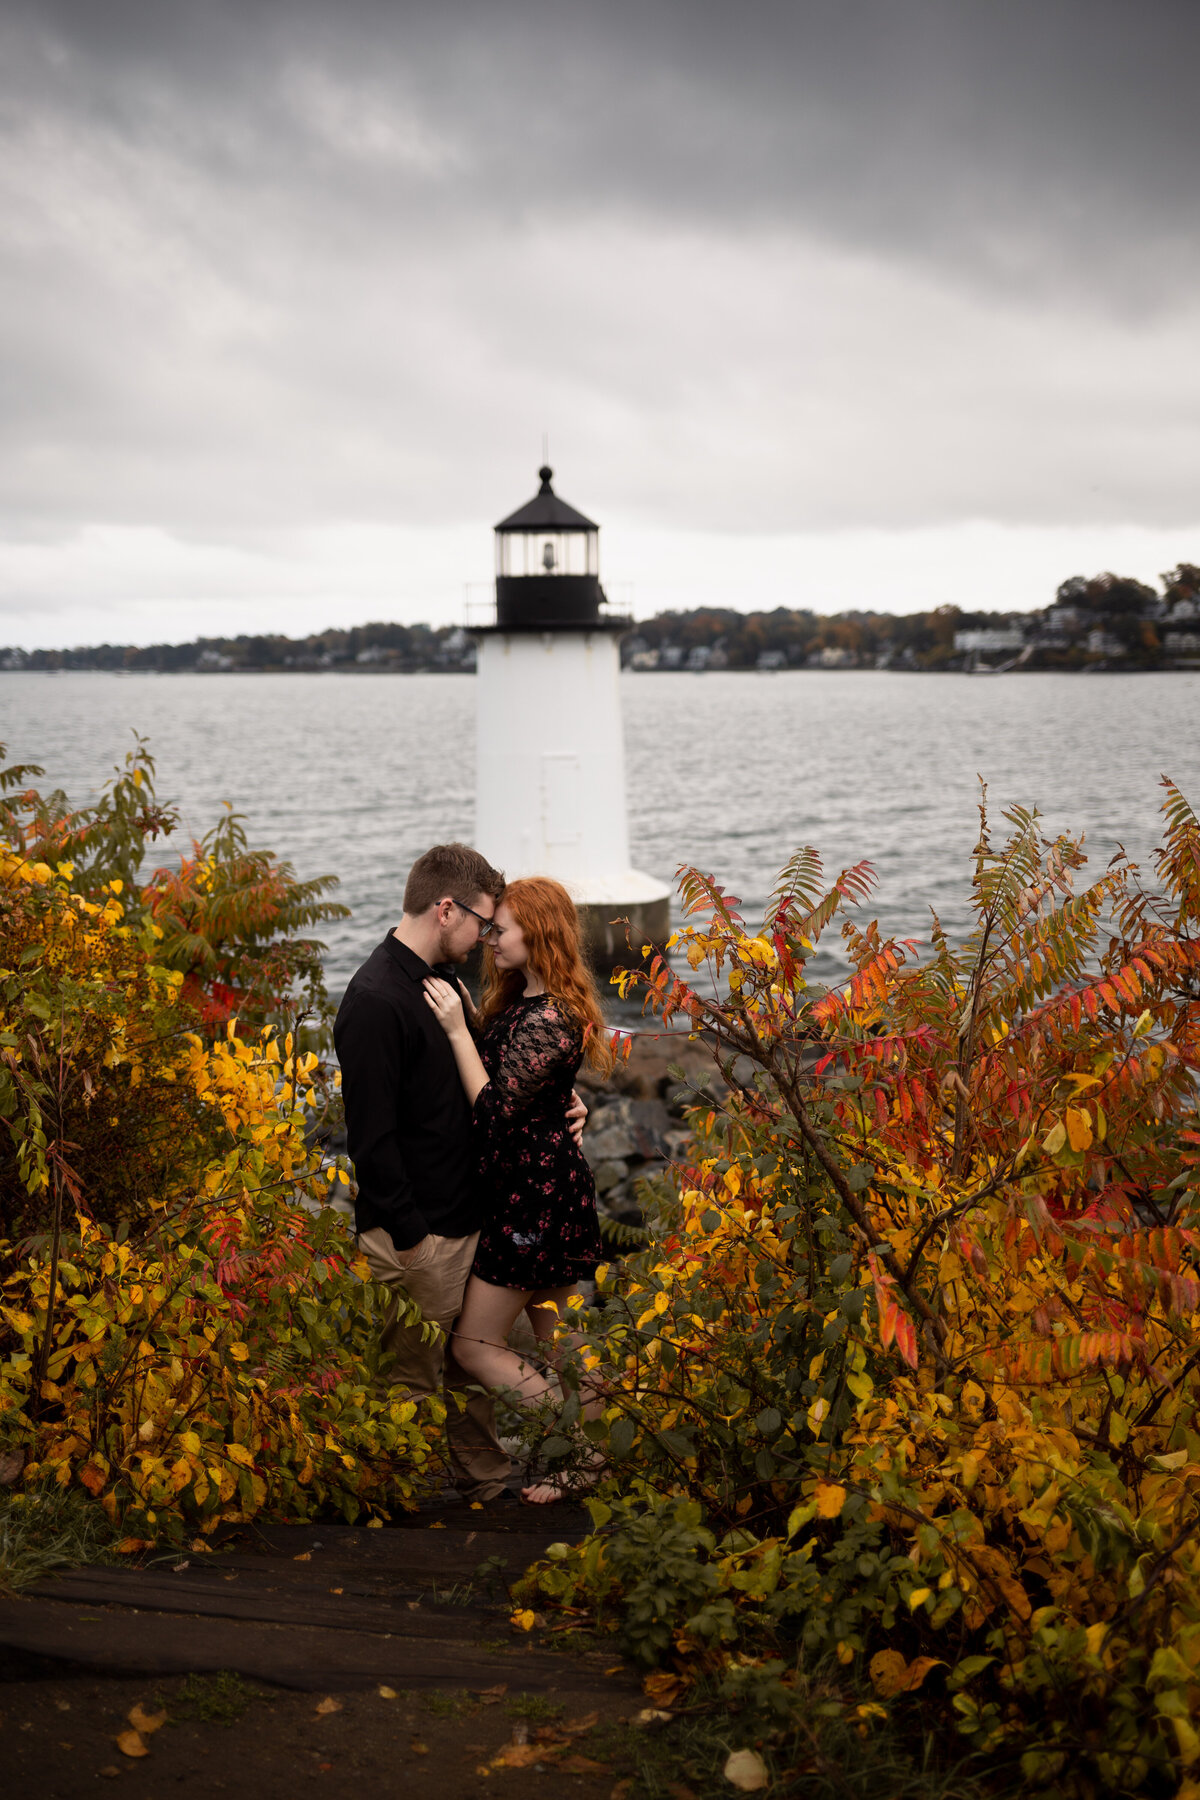 A couple cuddles one another in front of a lighthouse surrounded by the ocean.